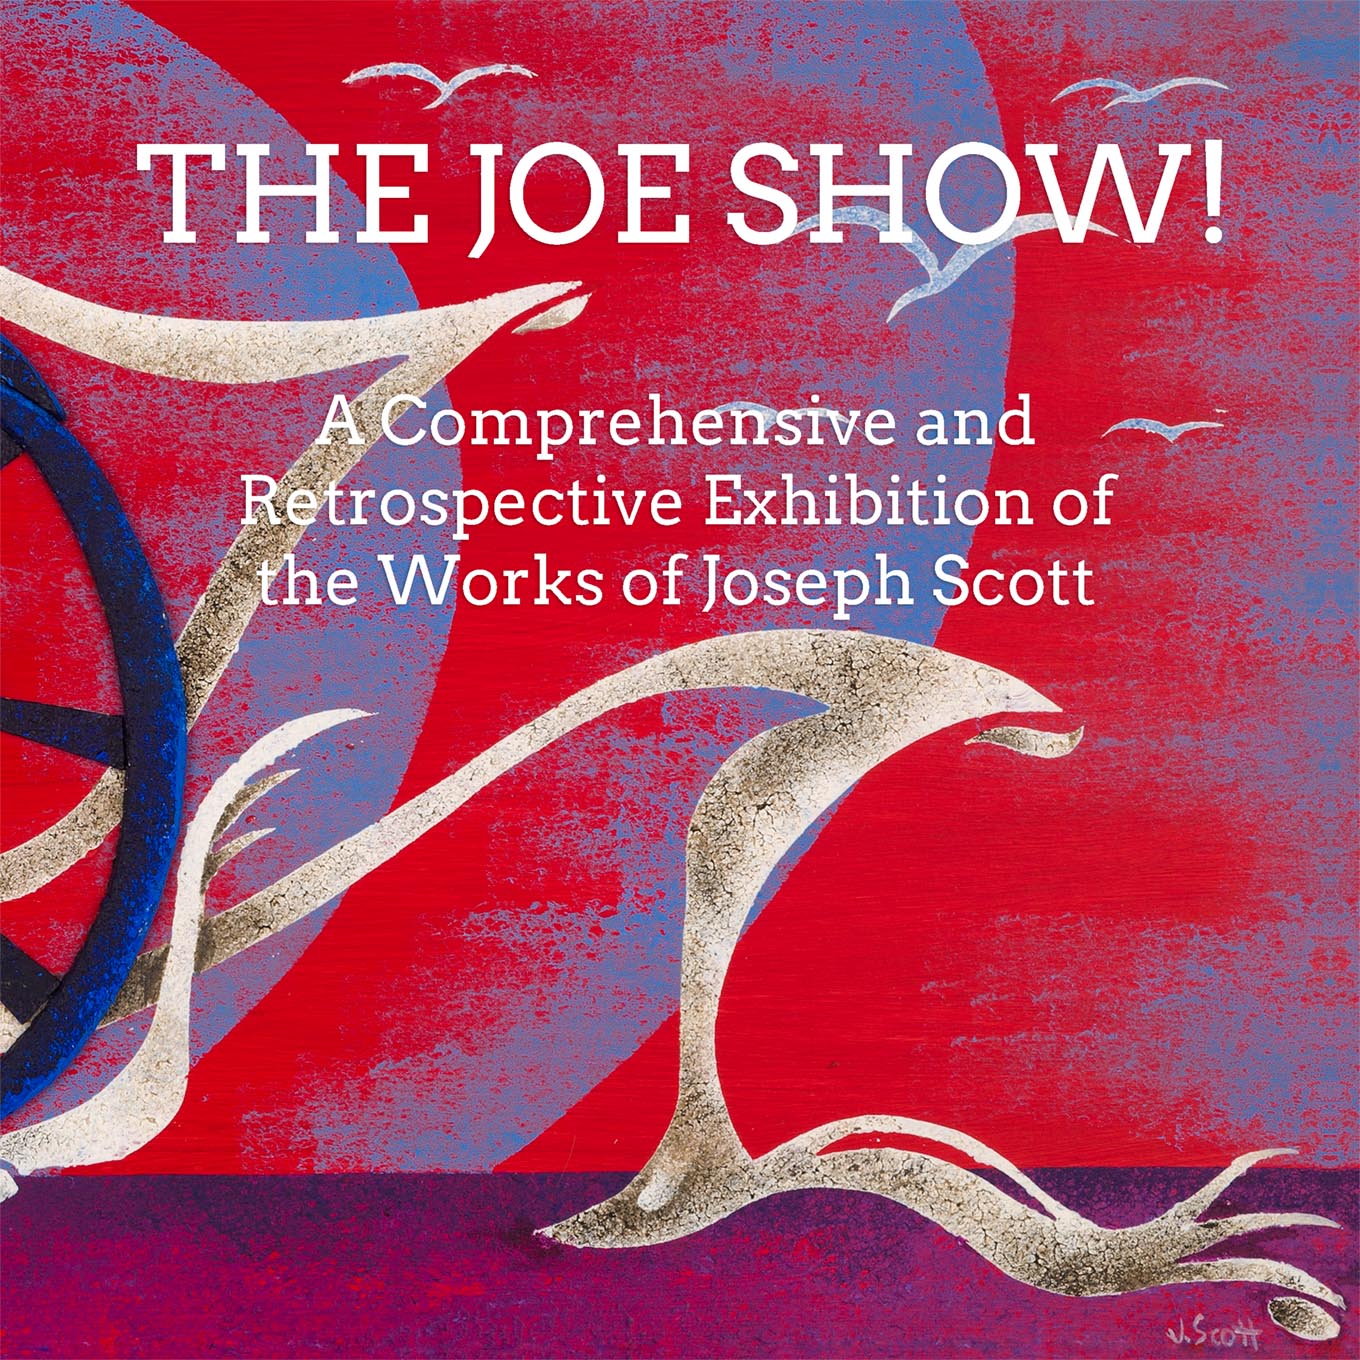 The Joe Show!: A Comprehensive and Retrospective Exhibition of the Works of Joseph Scott